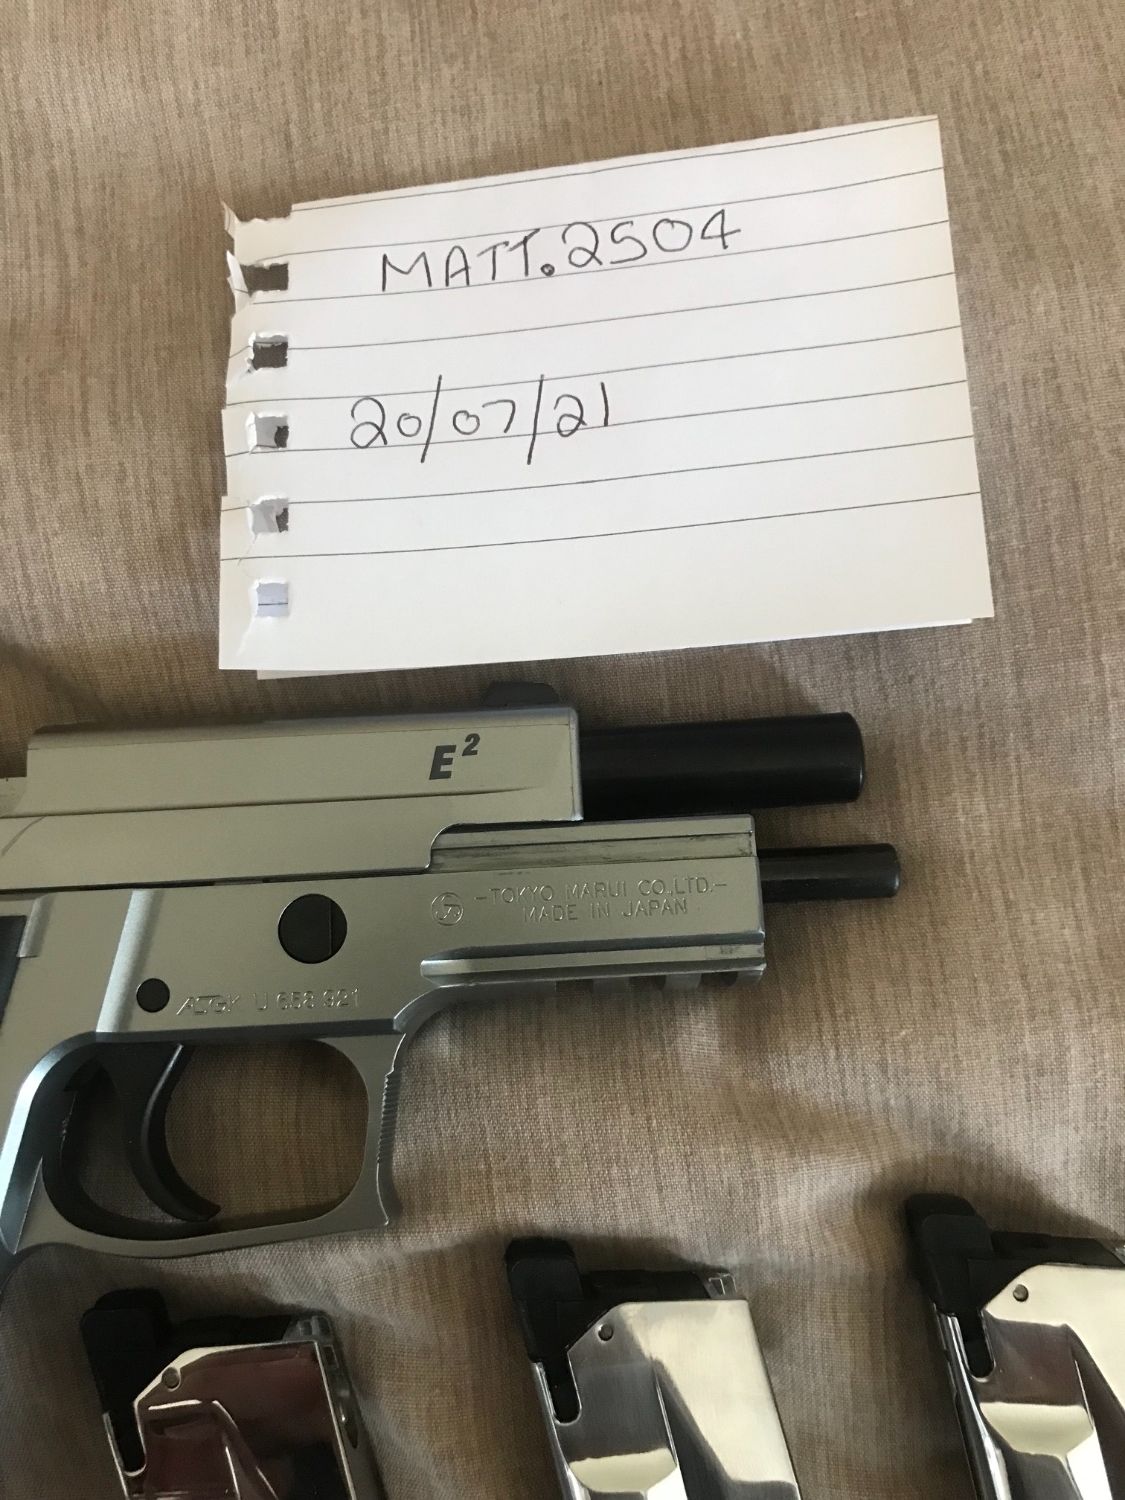 Tokyo Marui Sig P226 E2 Stainless - Gas Pistols - Airsoft Forums UK